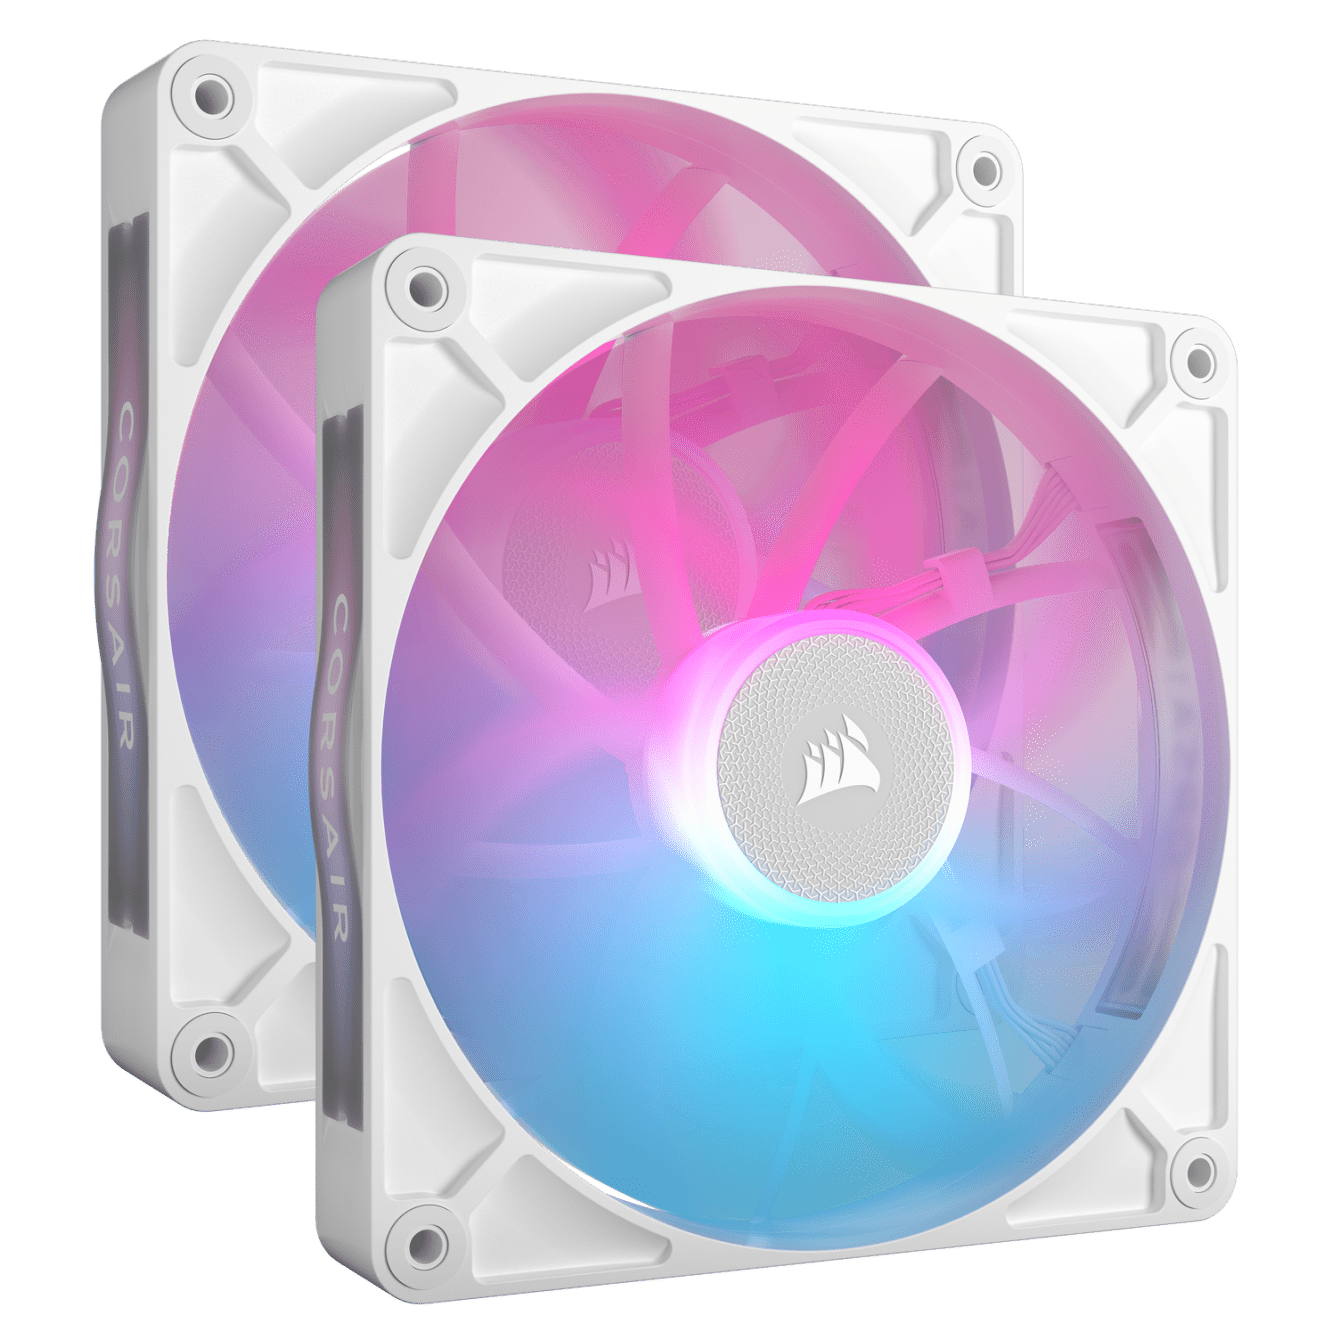 CORSAIR enhances the iCUE LINK ecosystem with new high-performance RX fans